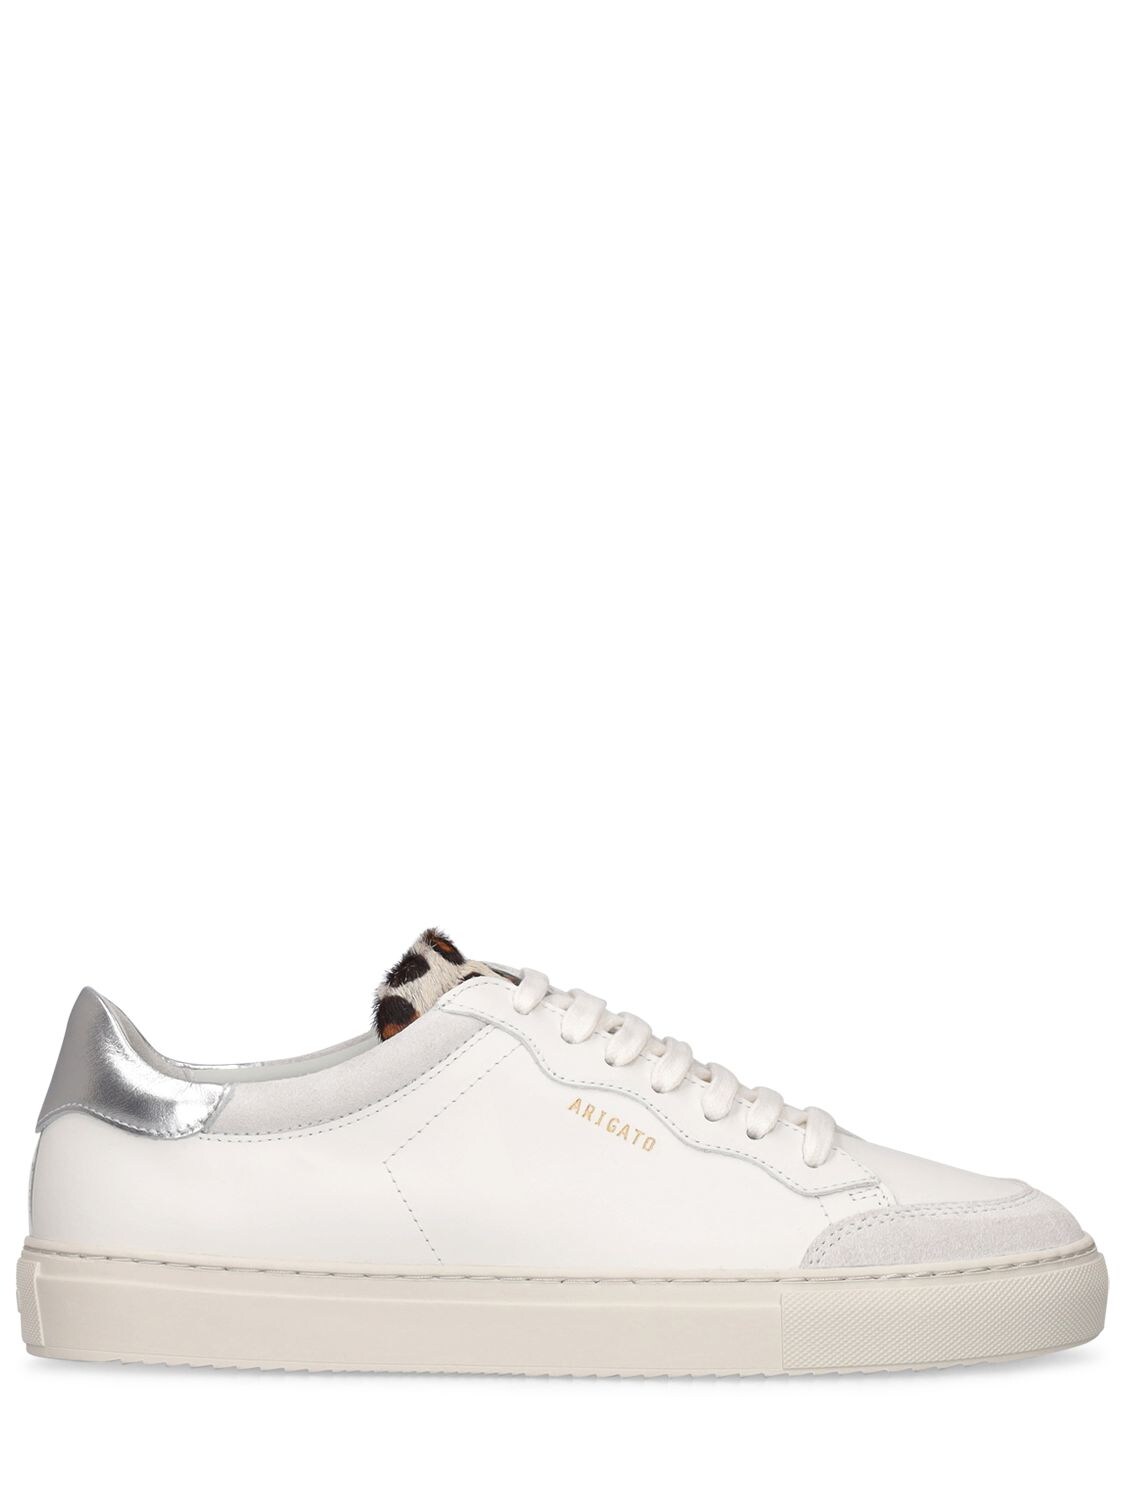 Clean 180 Leather Sneakers